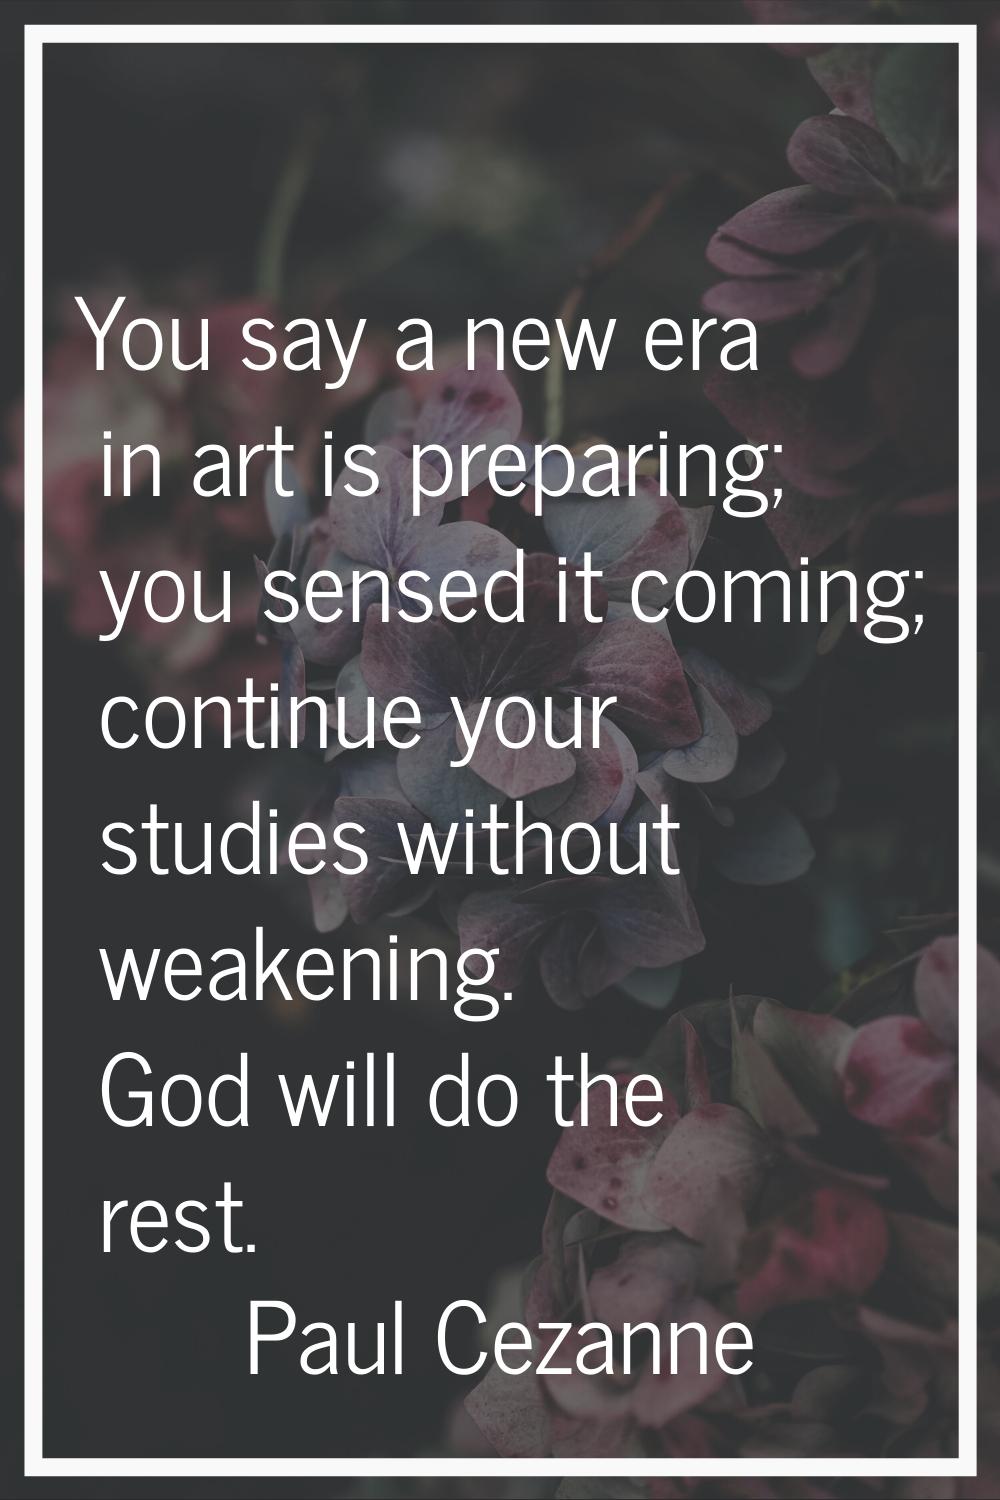 You say a new era in art is preparing; you sensed it coming; continue your studies without weakenin